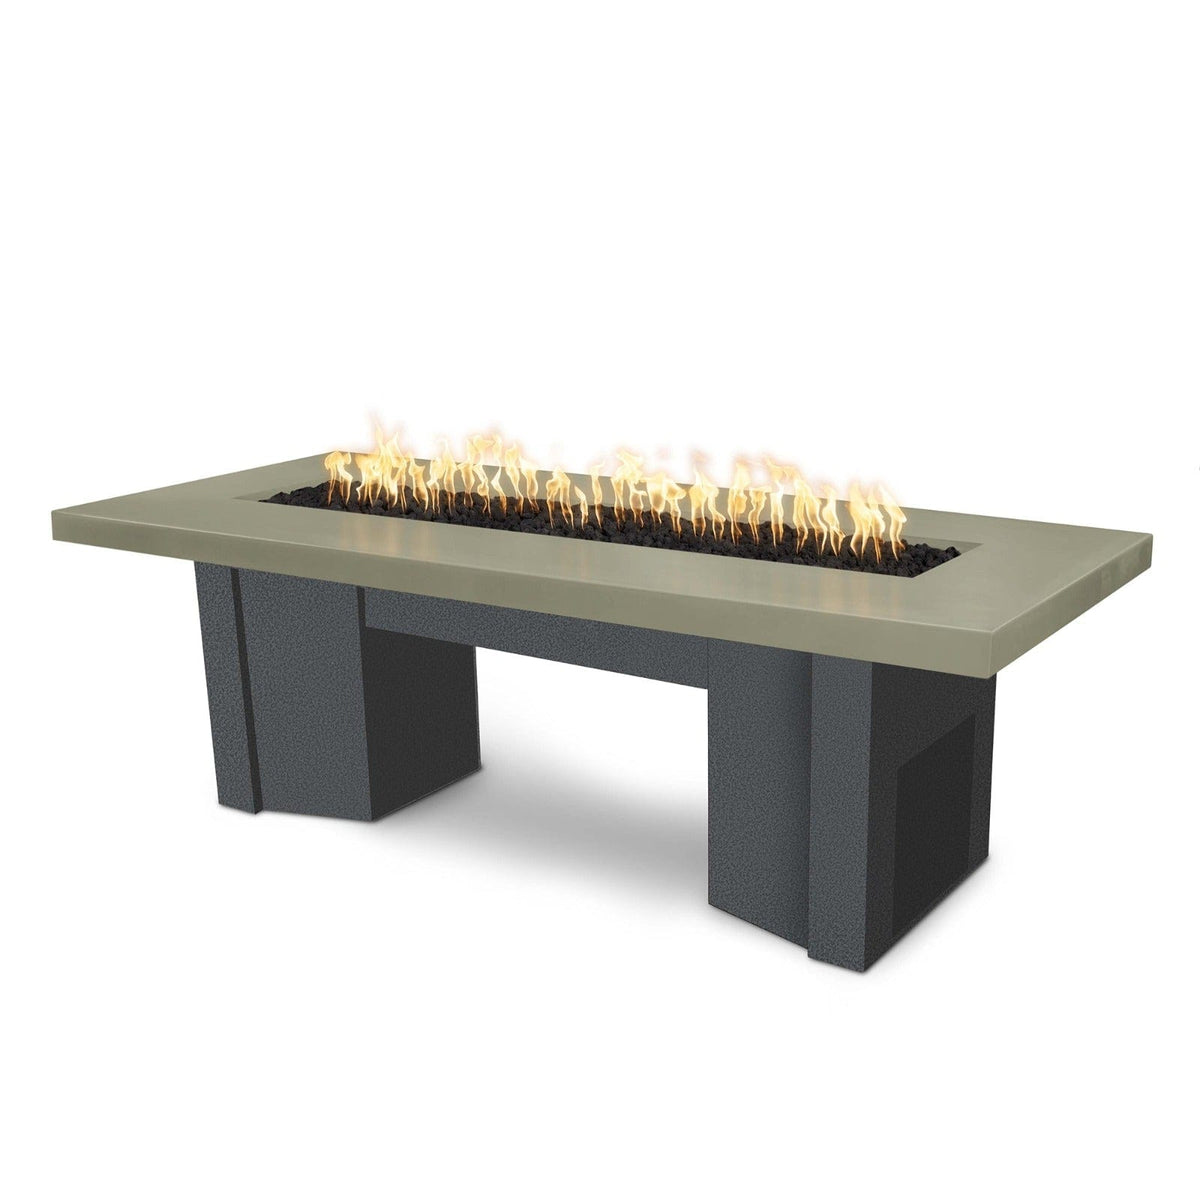 The Outdoor Plus Fire Features Ash (-ASH) / Silver Vein Powder Coated Steel (-SLV) The Outdoor Plus 60&quot; Alameda Fire Table Smooth Concrete in Liquid Propane - 110V Plug &amp; Play Electronic Ignition / OPT-ALMGFRC60EKIT-LP